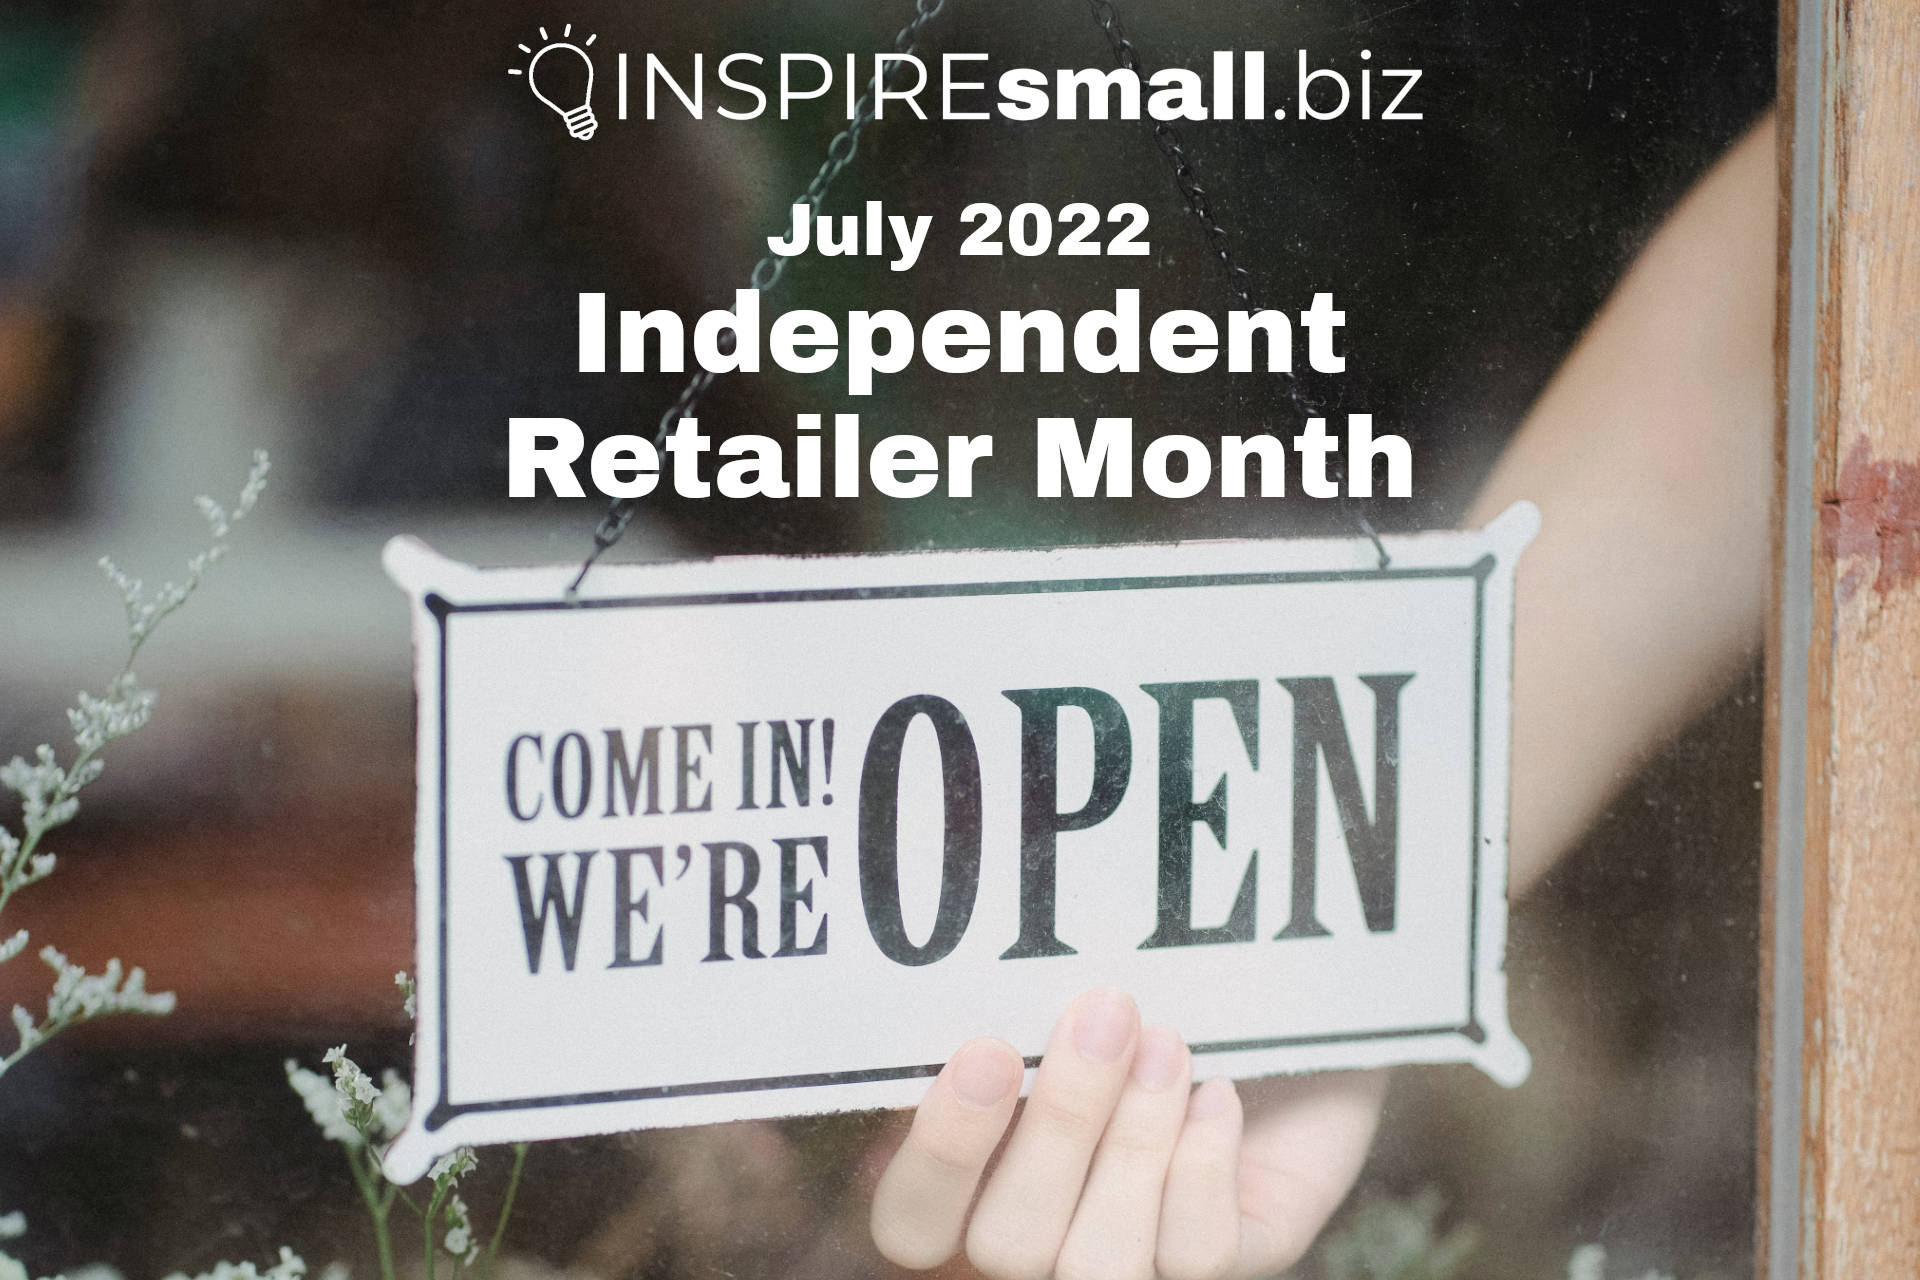 July is Independent Retailer Month, events from INSPIREsmall.biz. A background image of a person flipping an open sign to open in a shop front window.